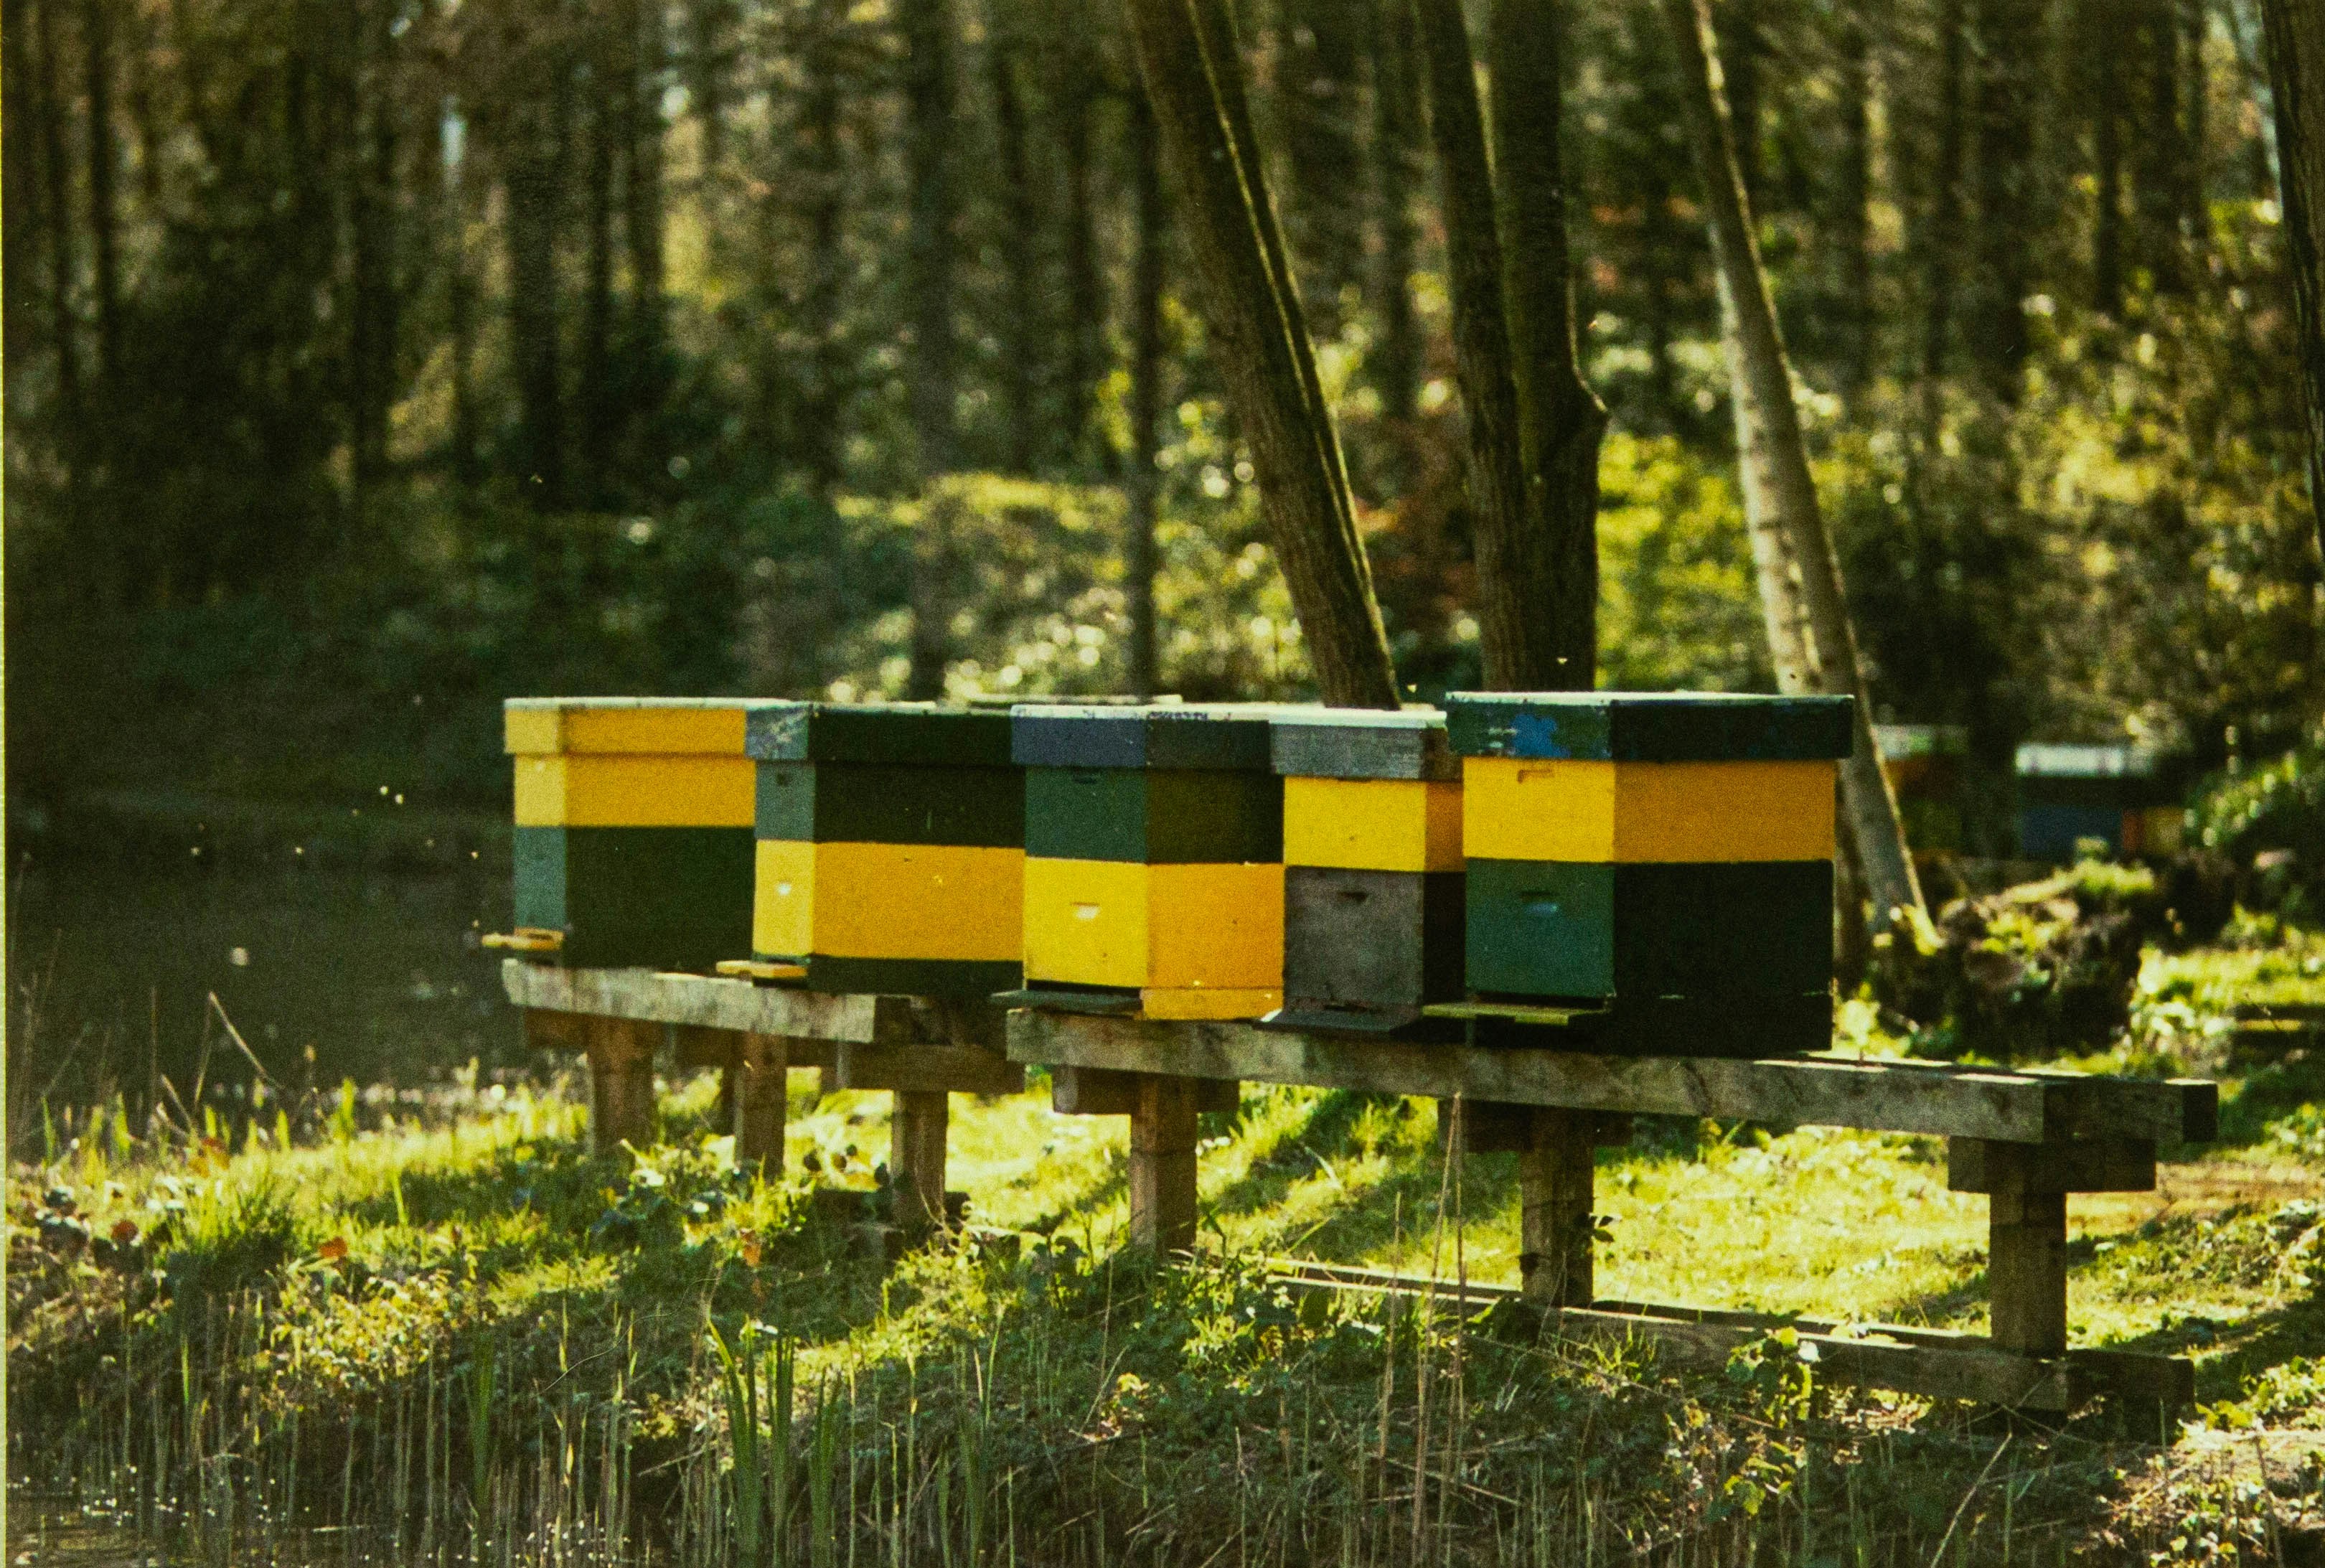 Colorful beehives on wooden stands in a sunny forest clearing